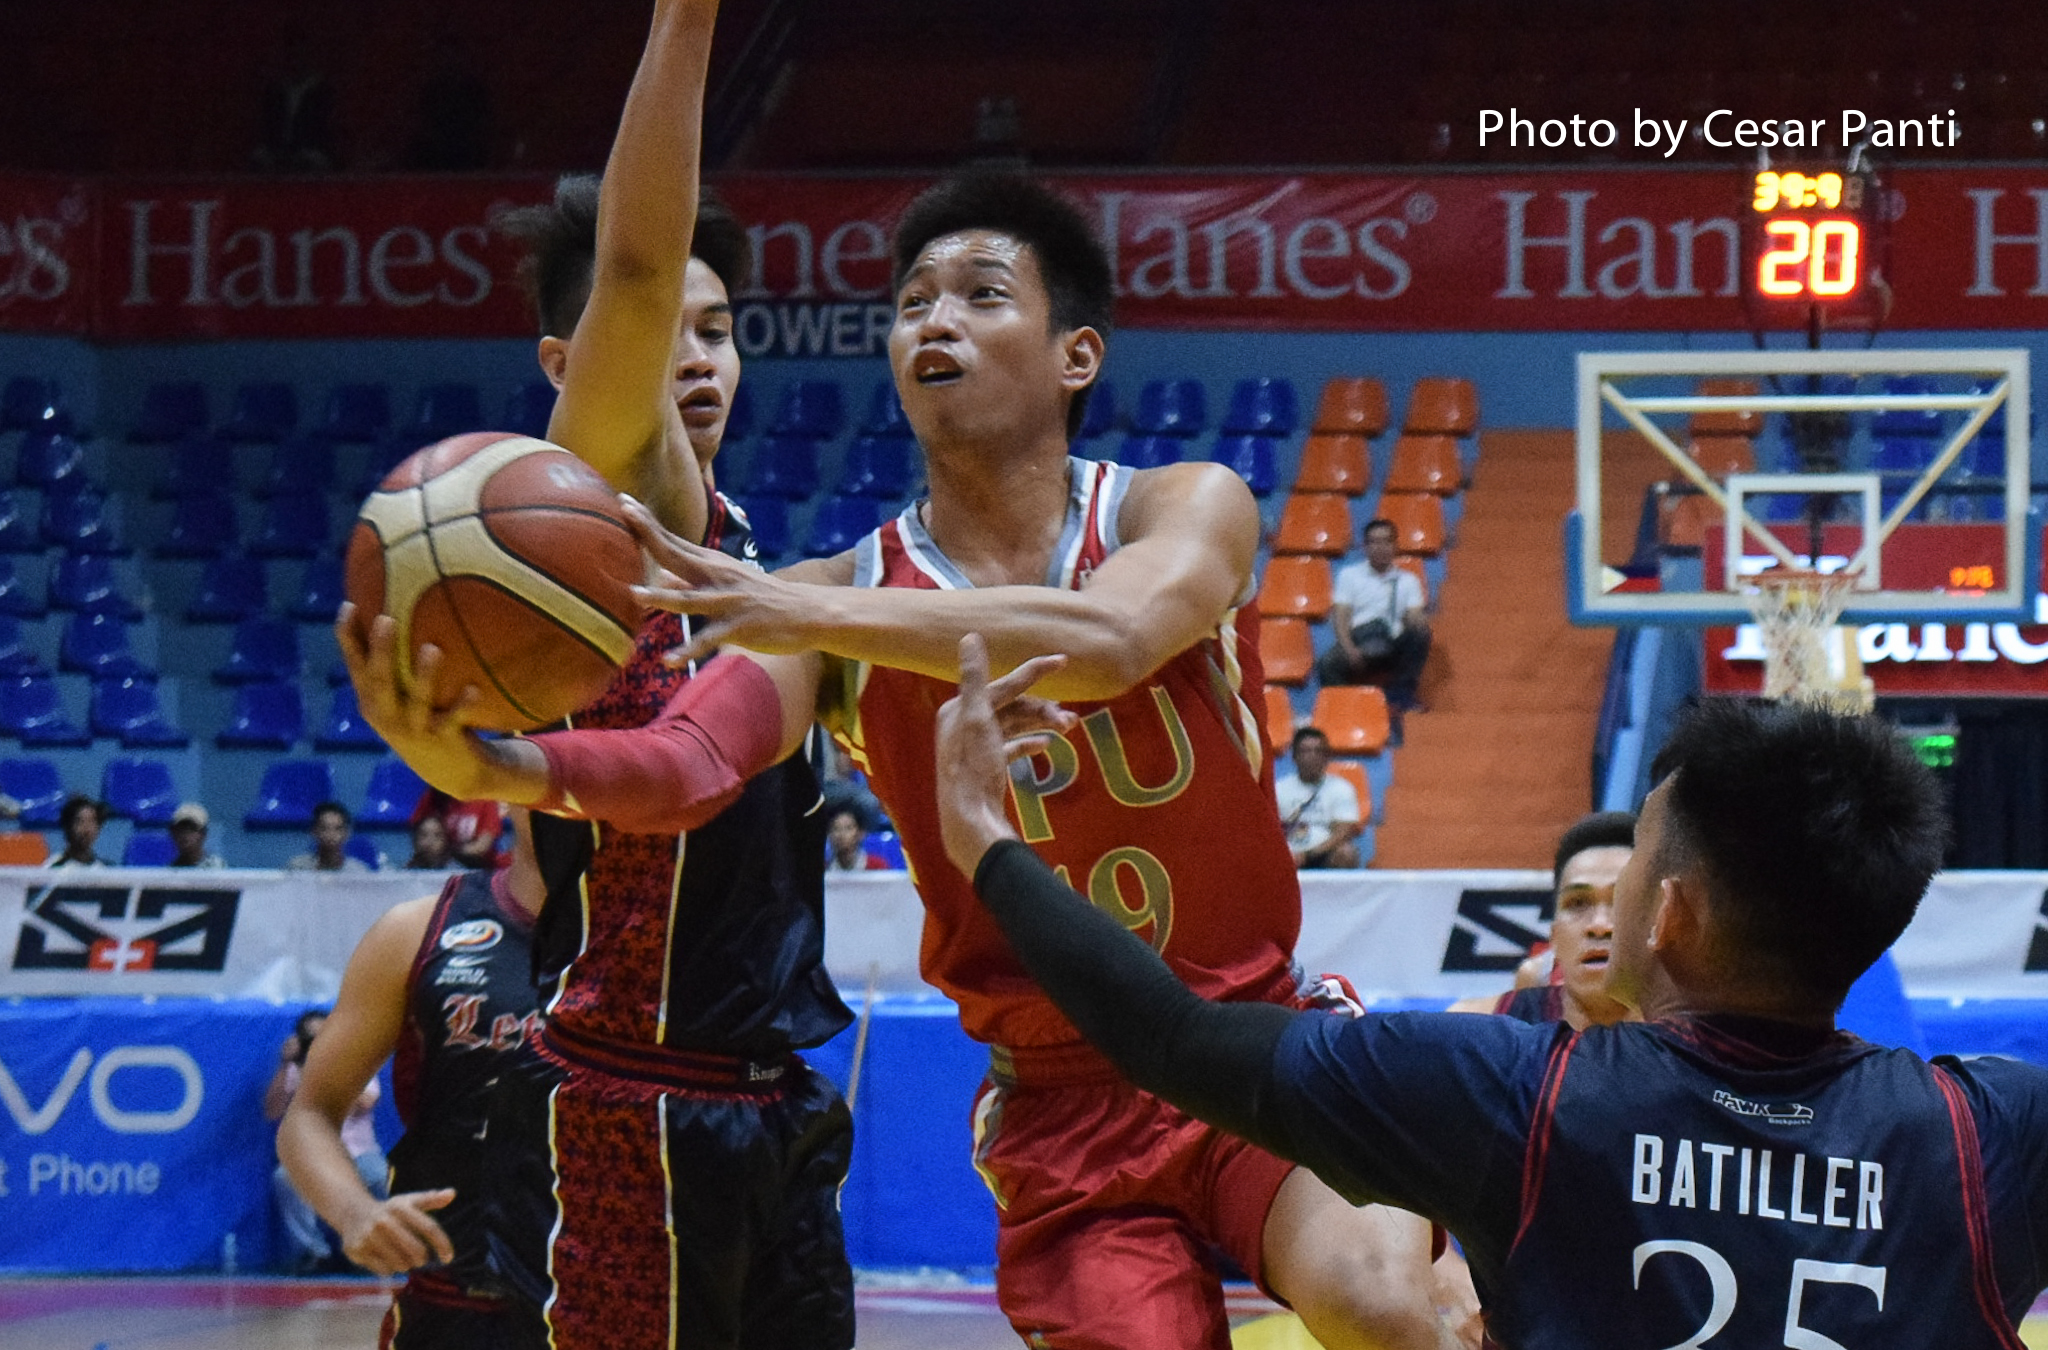 Jaycee Marcelino takes charge in 4th as Lyceum downs Letran